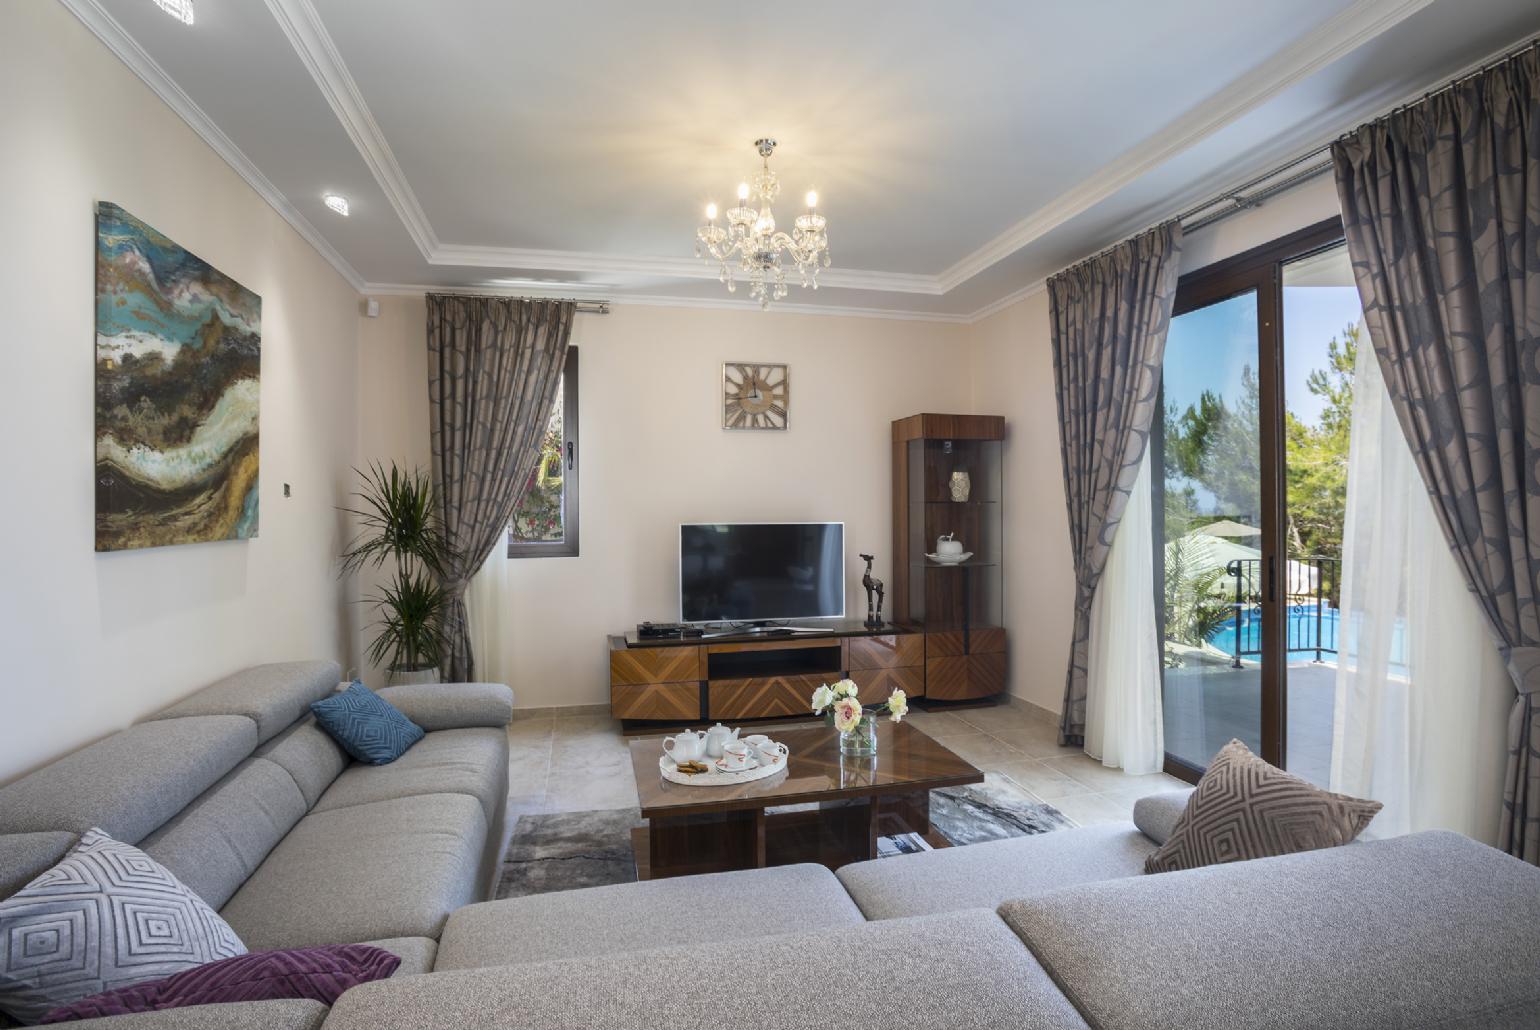 Open-plan living room with sofas, dining area, kitchen, A/C, WiFi internet and satellite TV